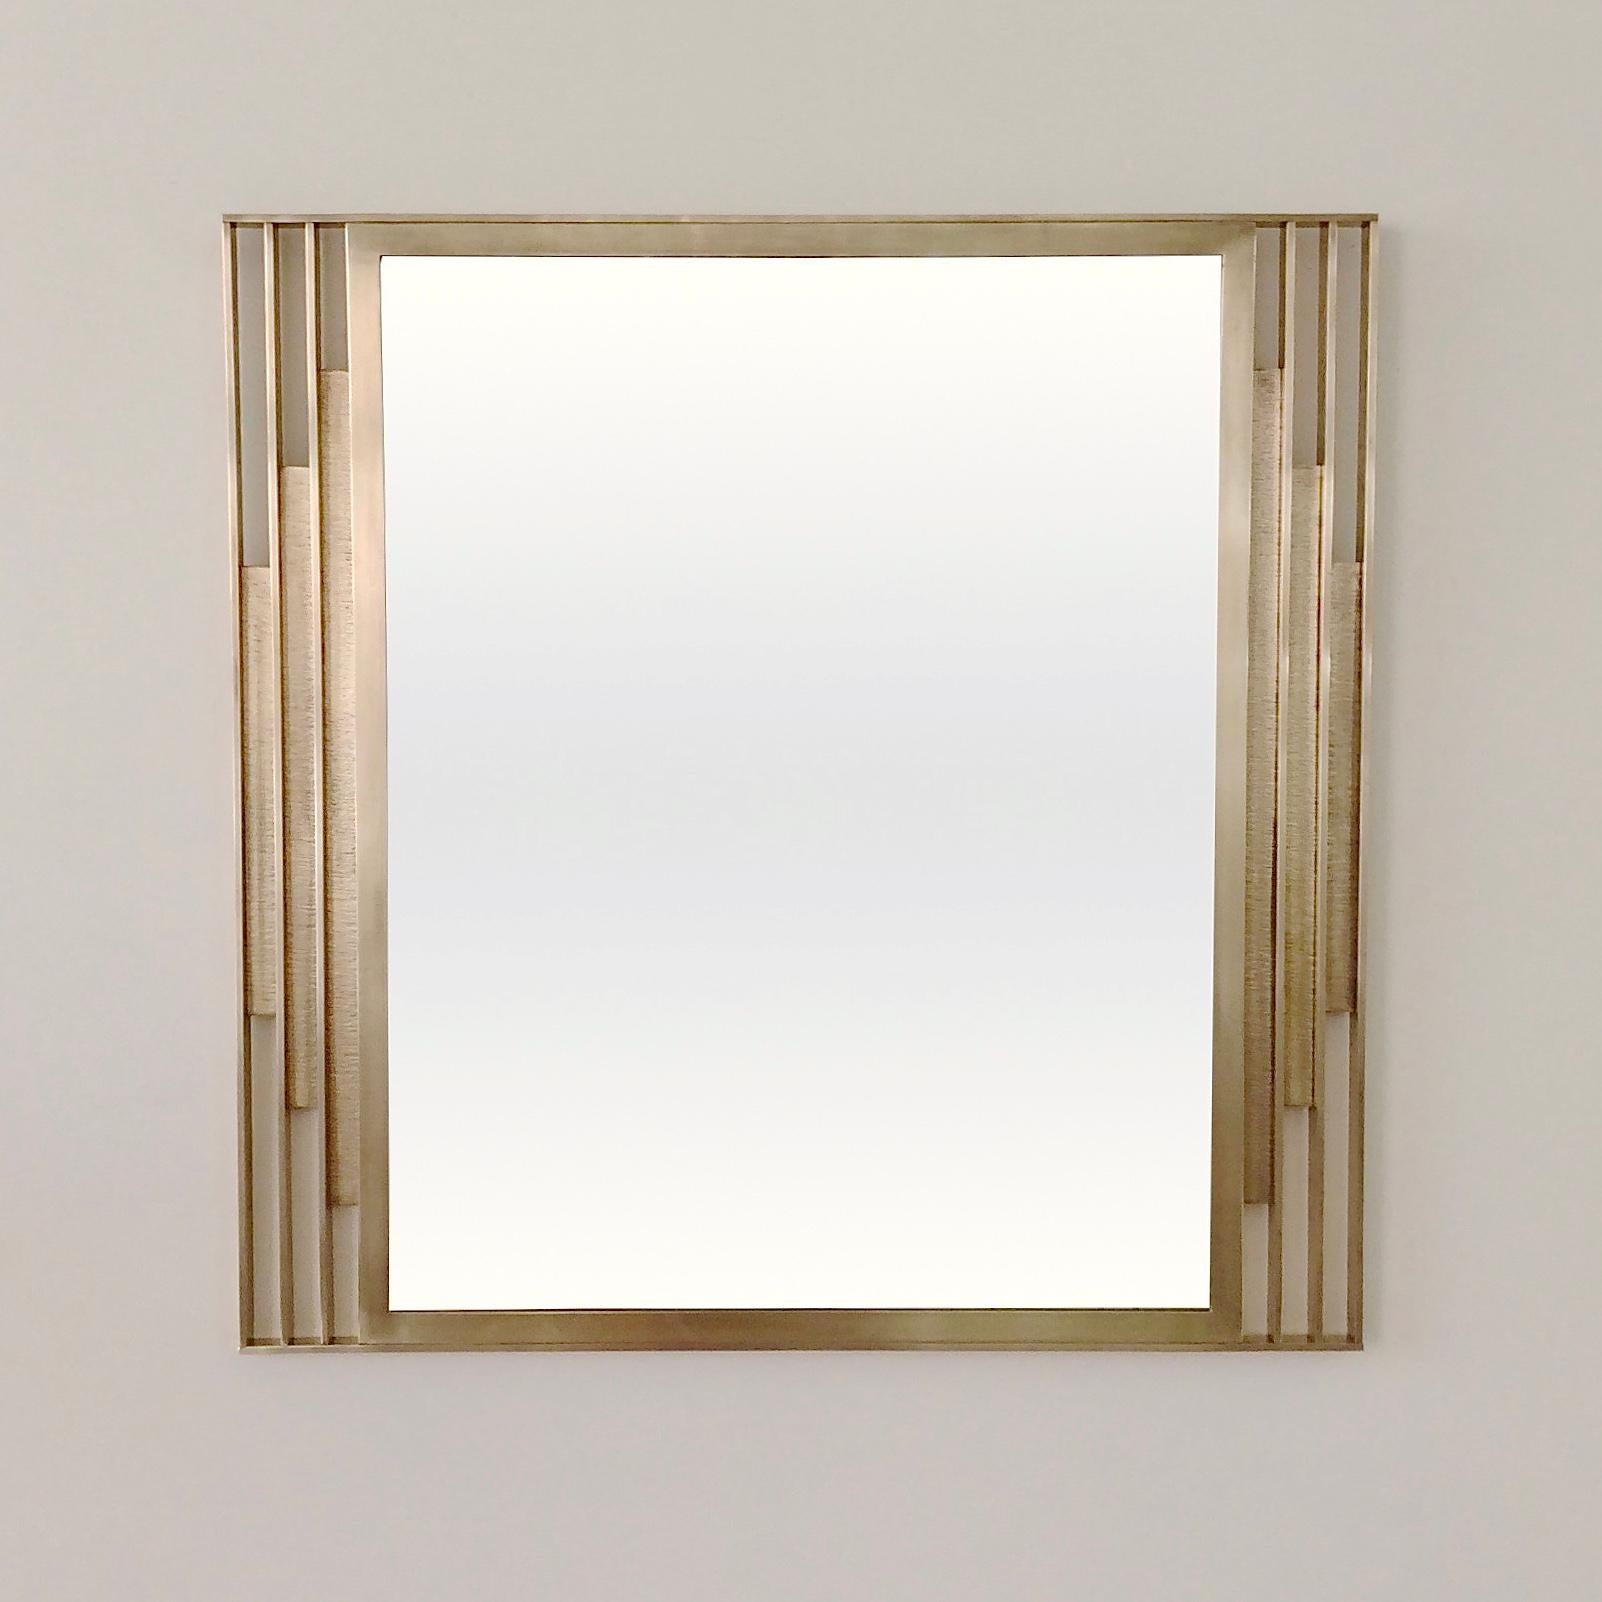 Mid-century square wall mirror, circa 1970, Italy.
Design attributed to Luciano Frigerio.
Polished brass.
Dimensions: 70 X 70 cm , 2 cm D.
All purchases are covered by our Buyer Protection Guarantee.
This item can be returned within 7 days of